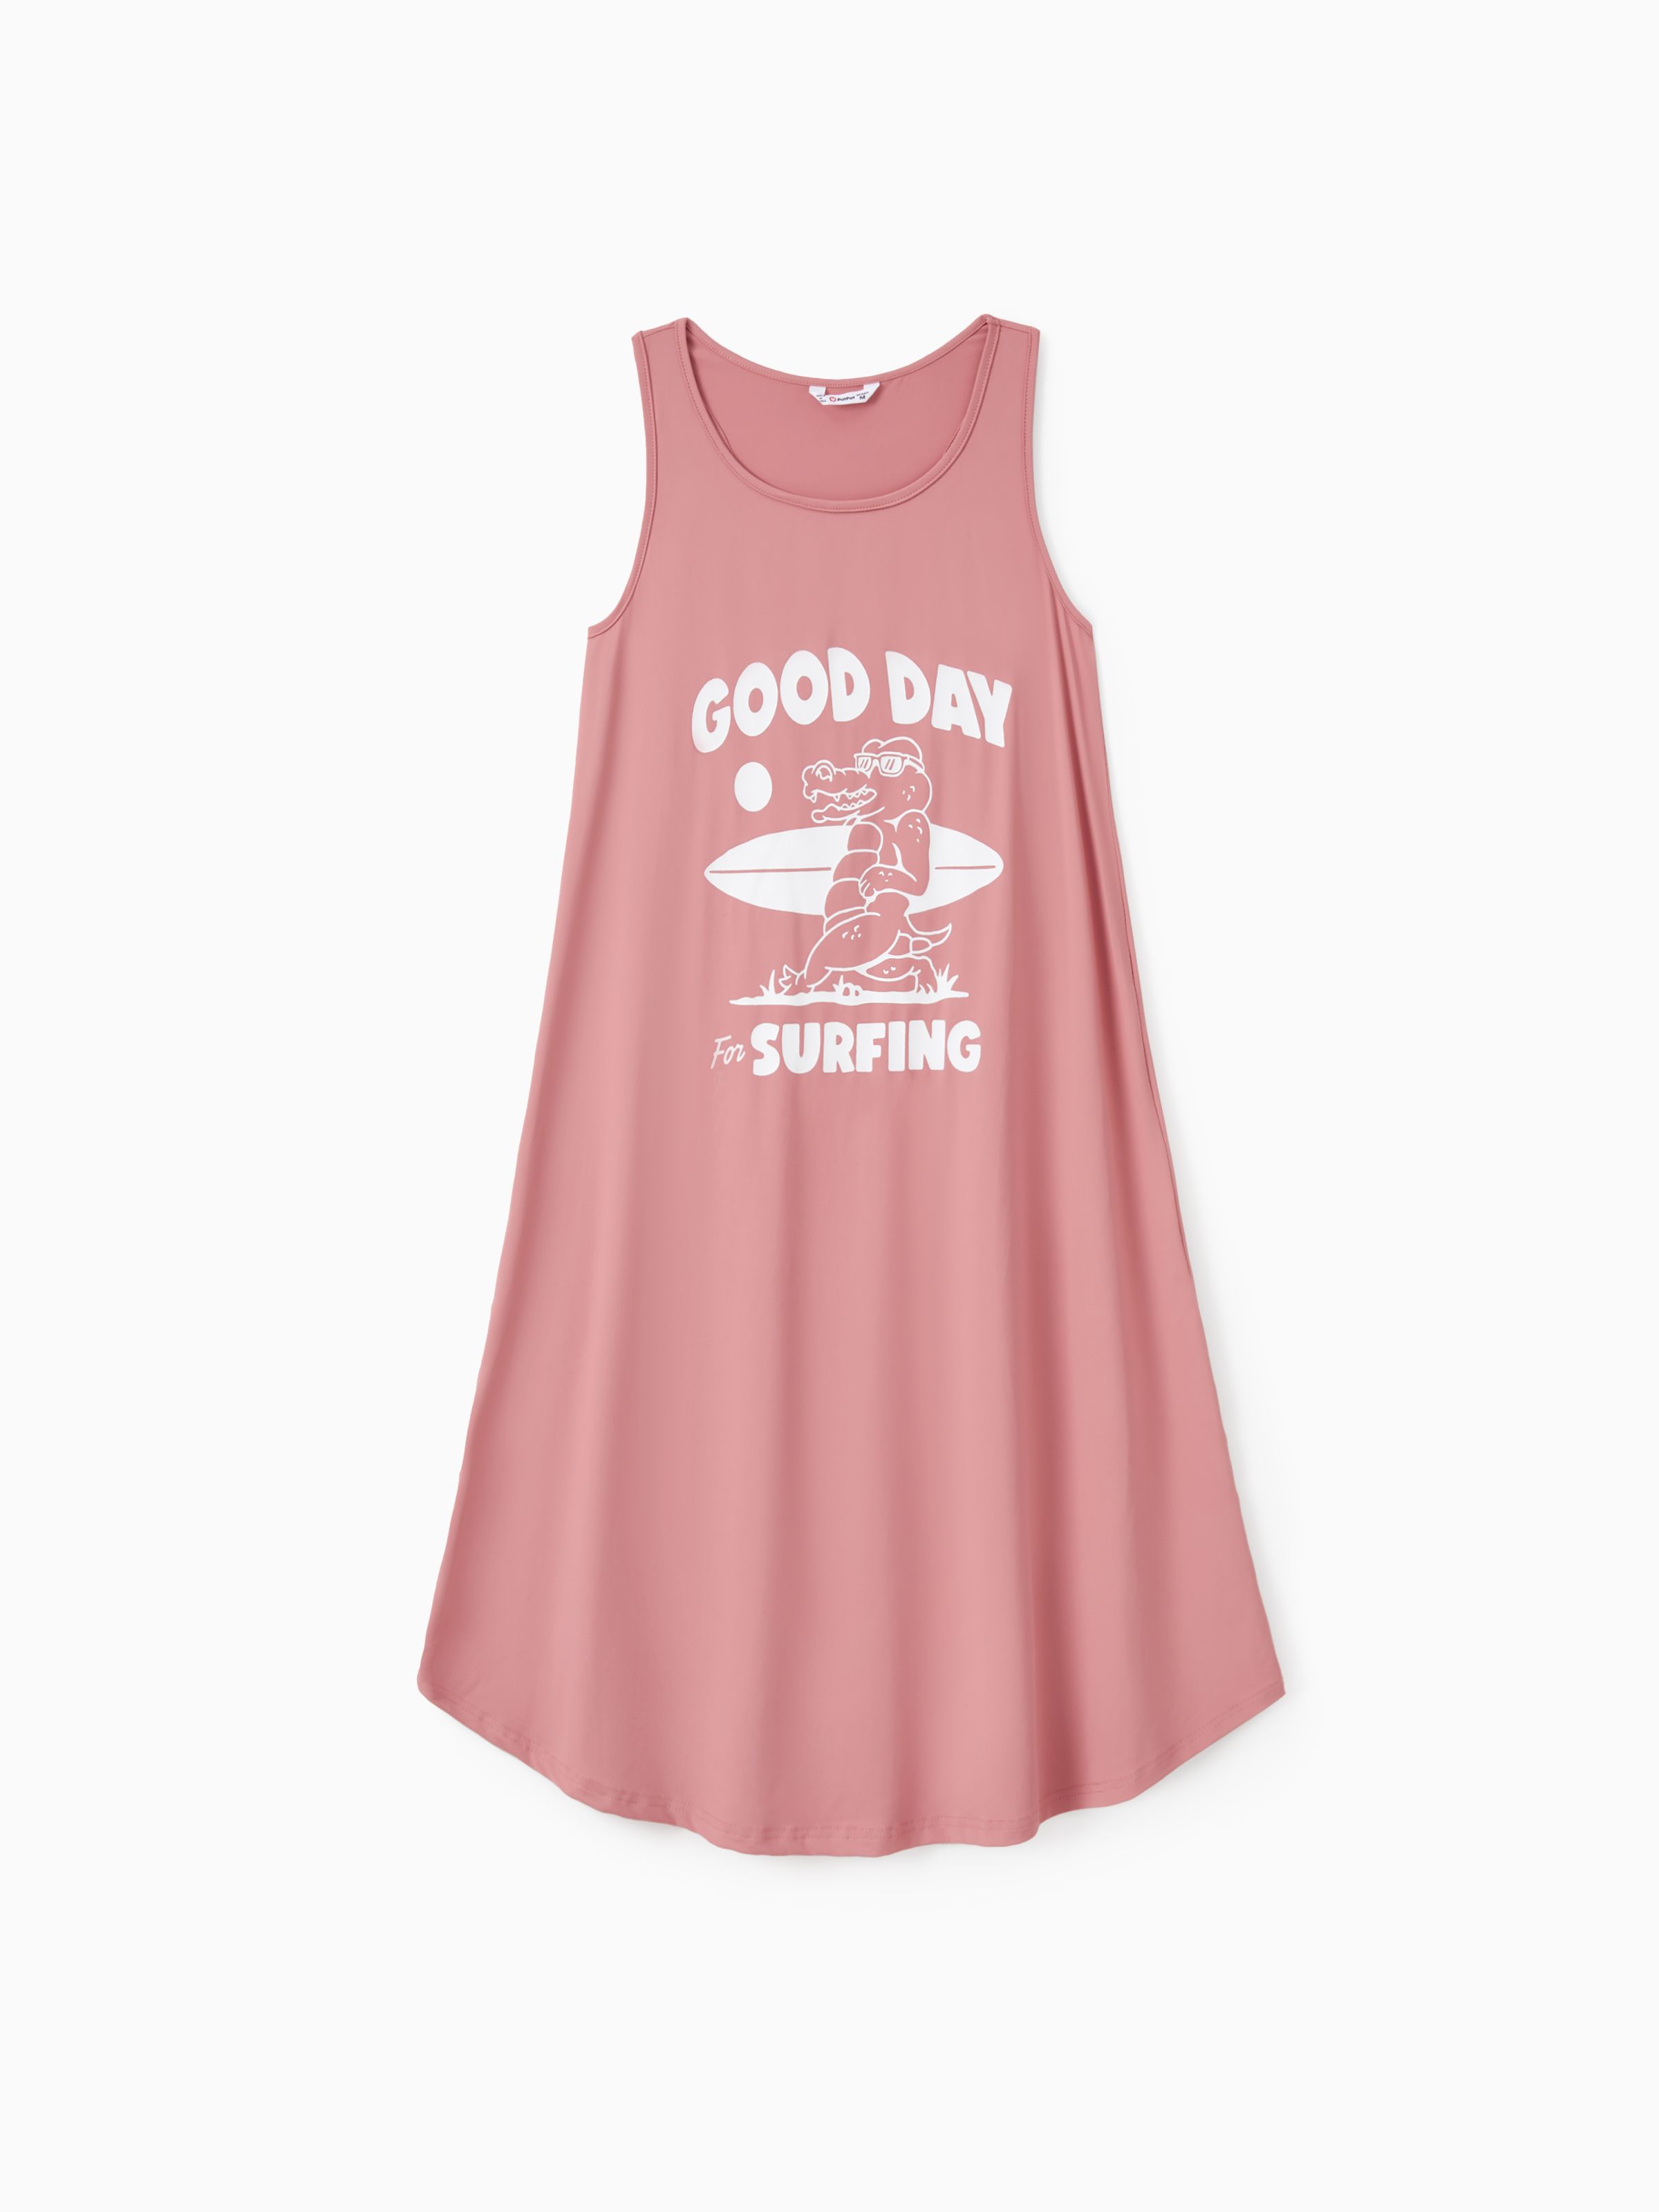 

Quick-Dry Mommy and Me Sleeveless Surfing Dress with Crocodile Graphic – Perfect for a Good Day on the Waves